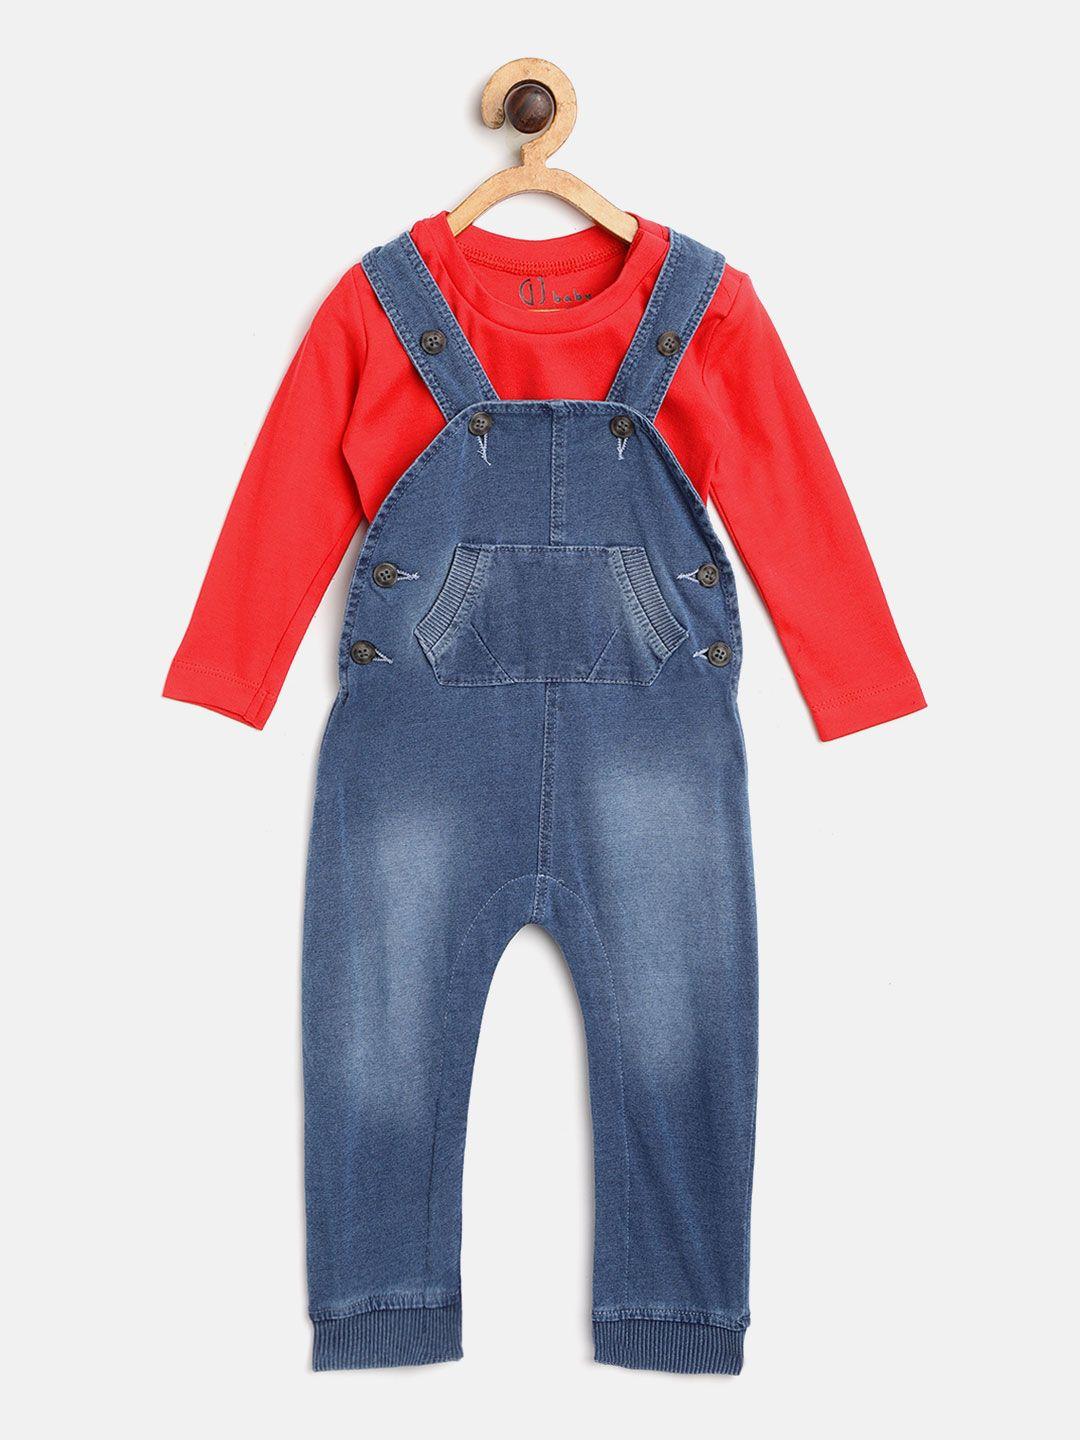 gini-and-jony-kids-red-&-blue-solid-t-shirt-with-denim-dungarees